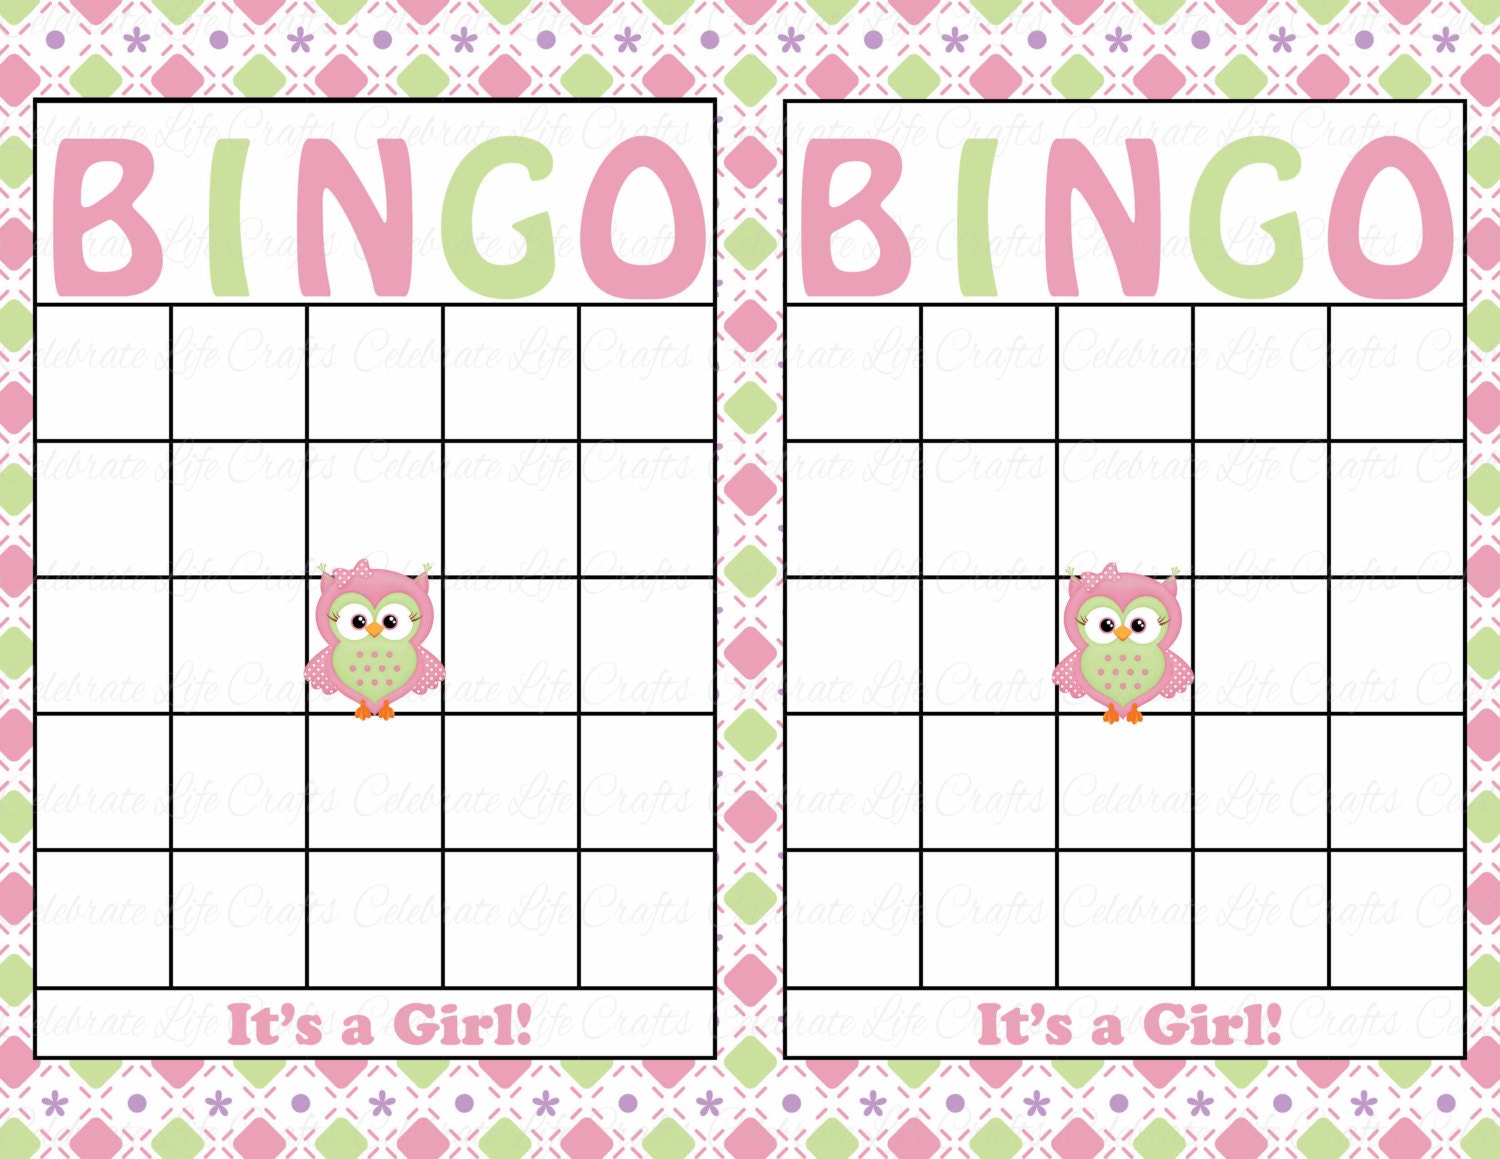 blank-baby-shower-bingo-cards-printable-party-baby-girl-etsy